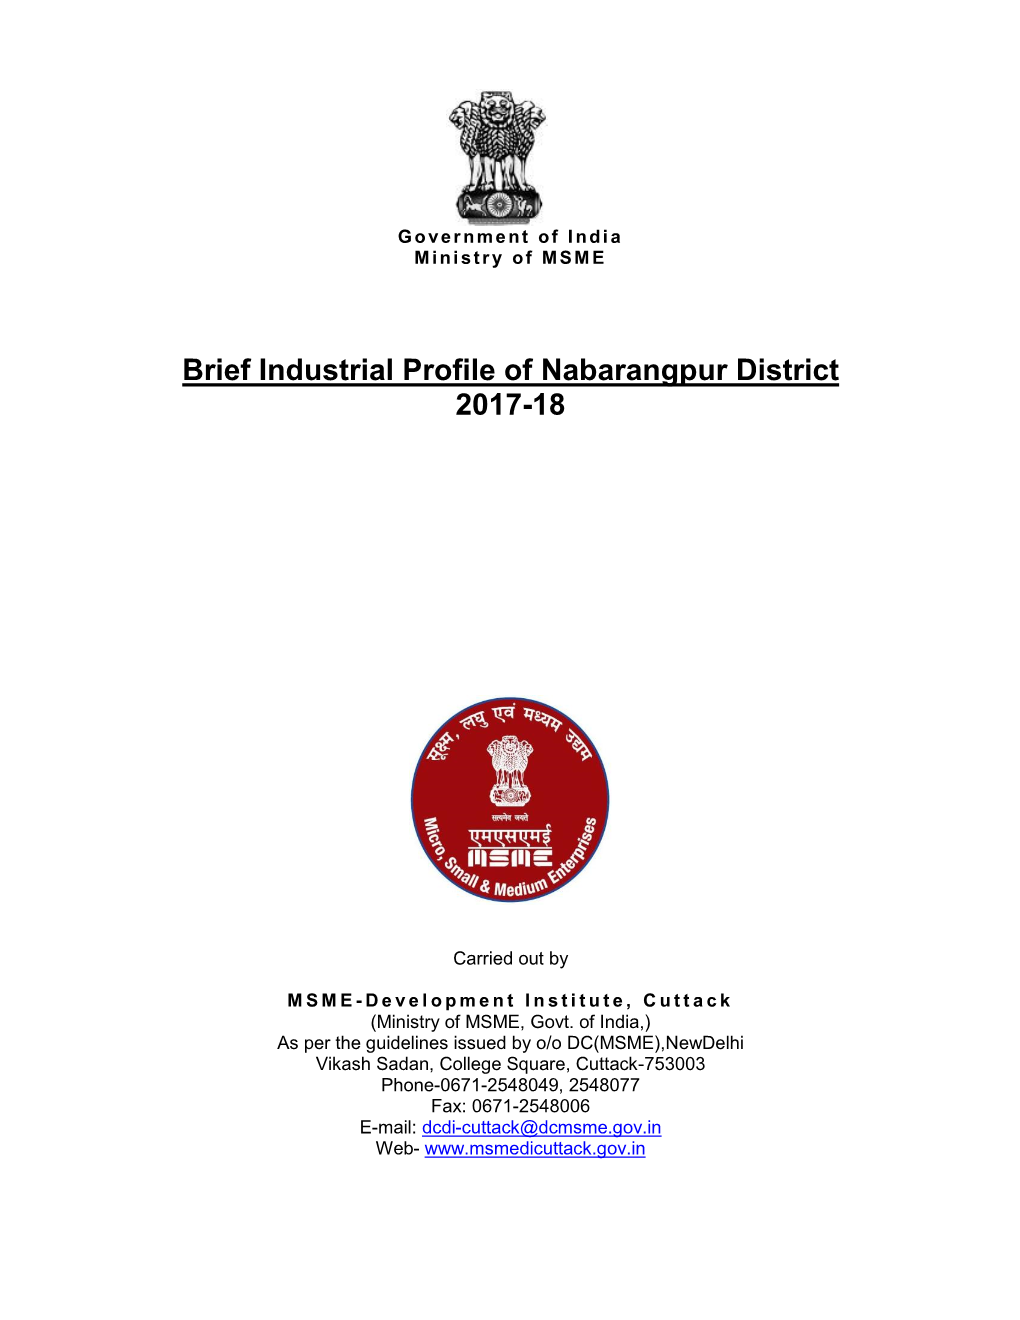 Brief Industrial Profile of Nabarangpur District 2017-18